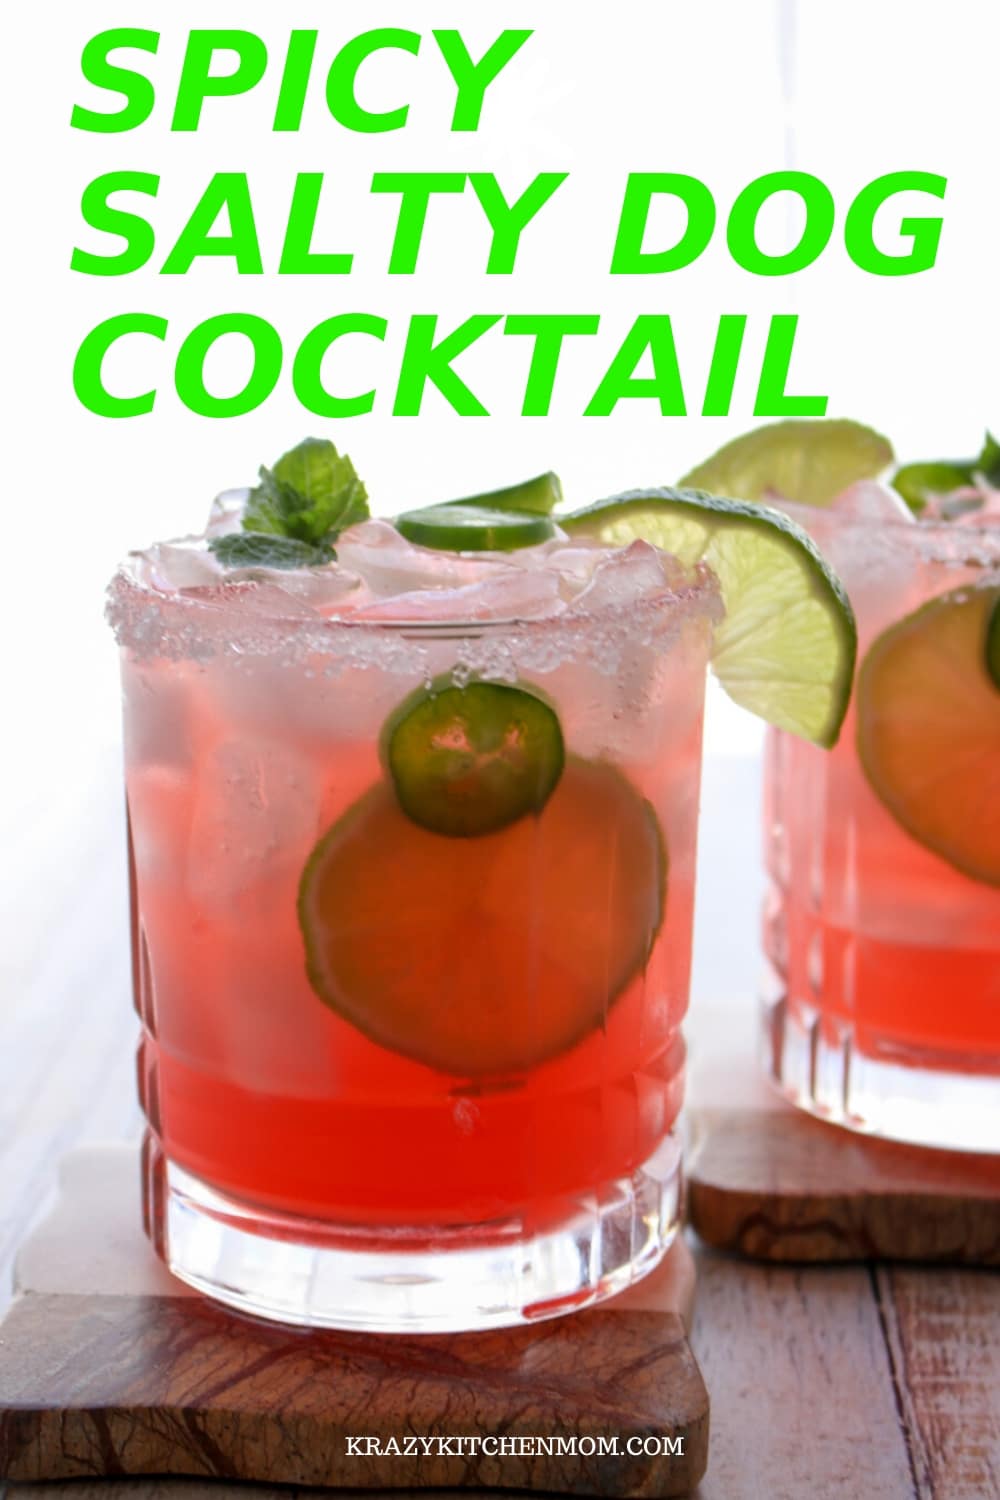 If you like a tart, sweet, spicy, refreshing cocktail, look no further. The Spicy Salty Dog Cocktail is made with vodka, pink grapefruit juice, jalapenos and splash of lime - cheers! via @krazykitchenmom